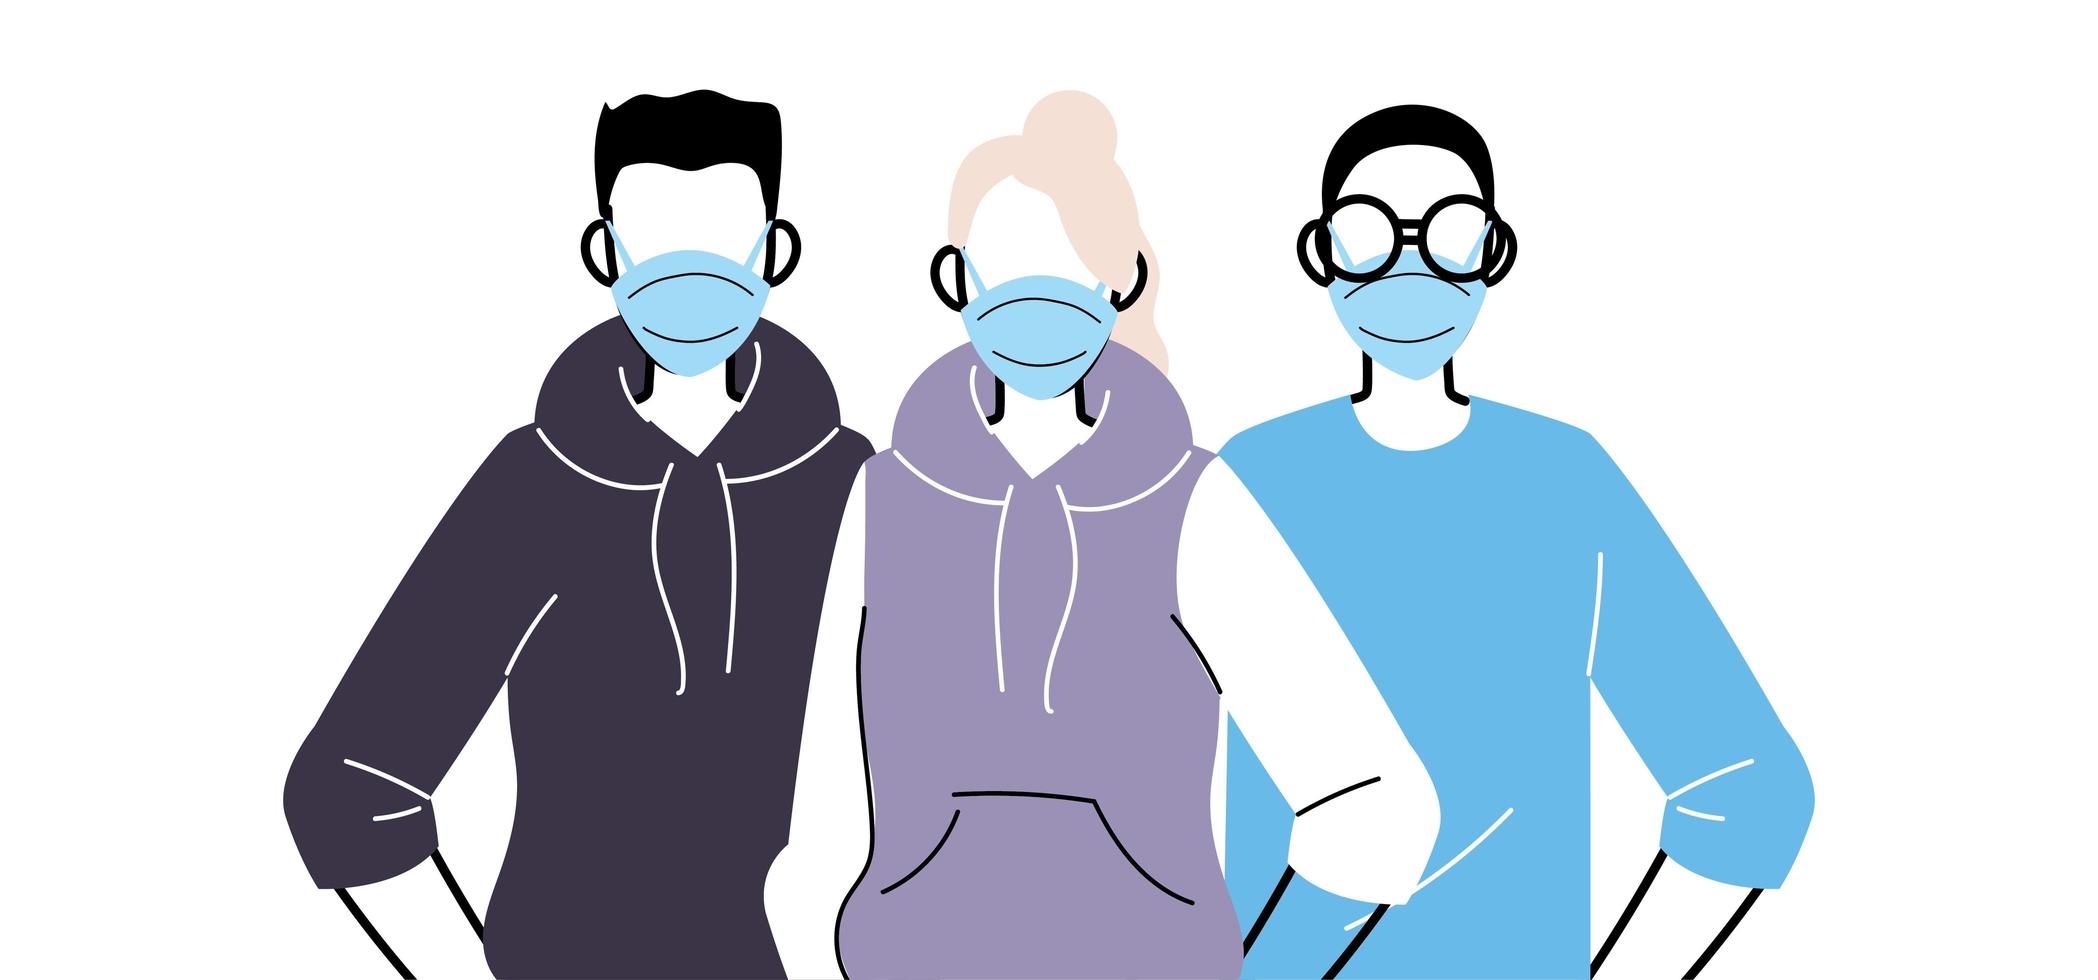 Group of people in protective medical face masks vector